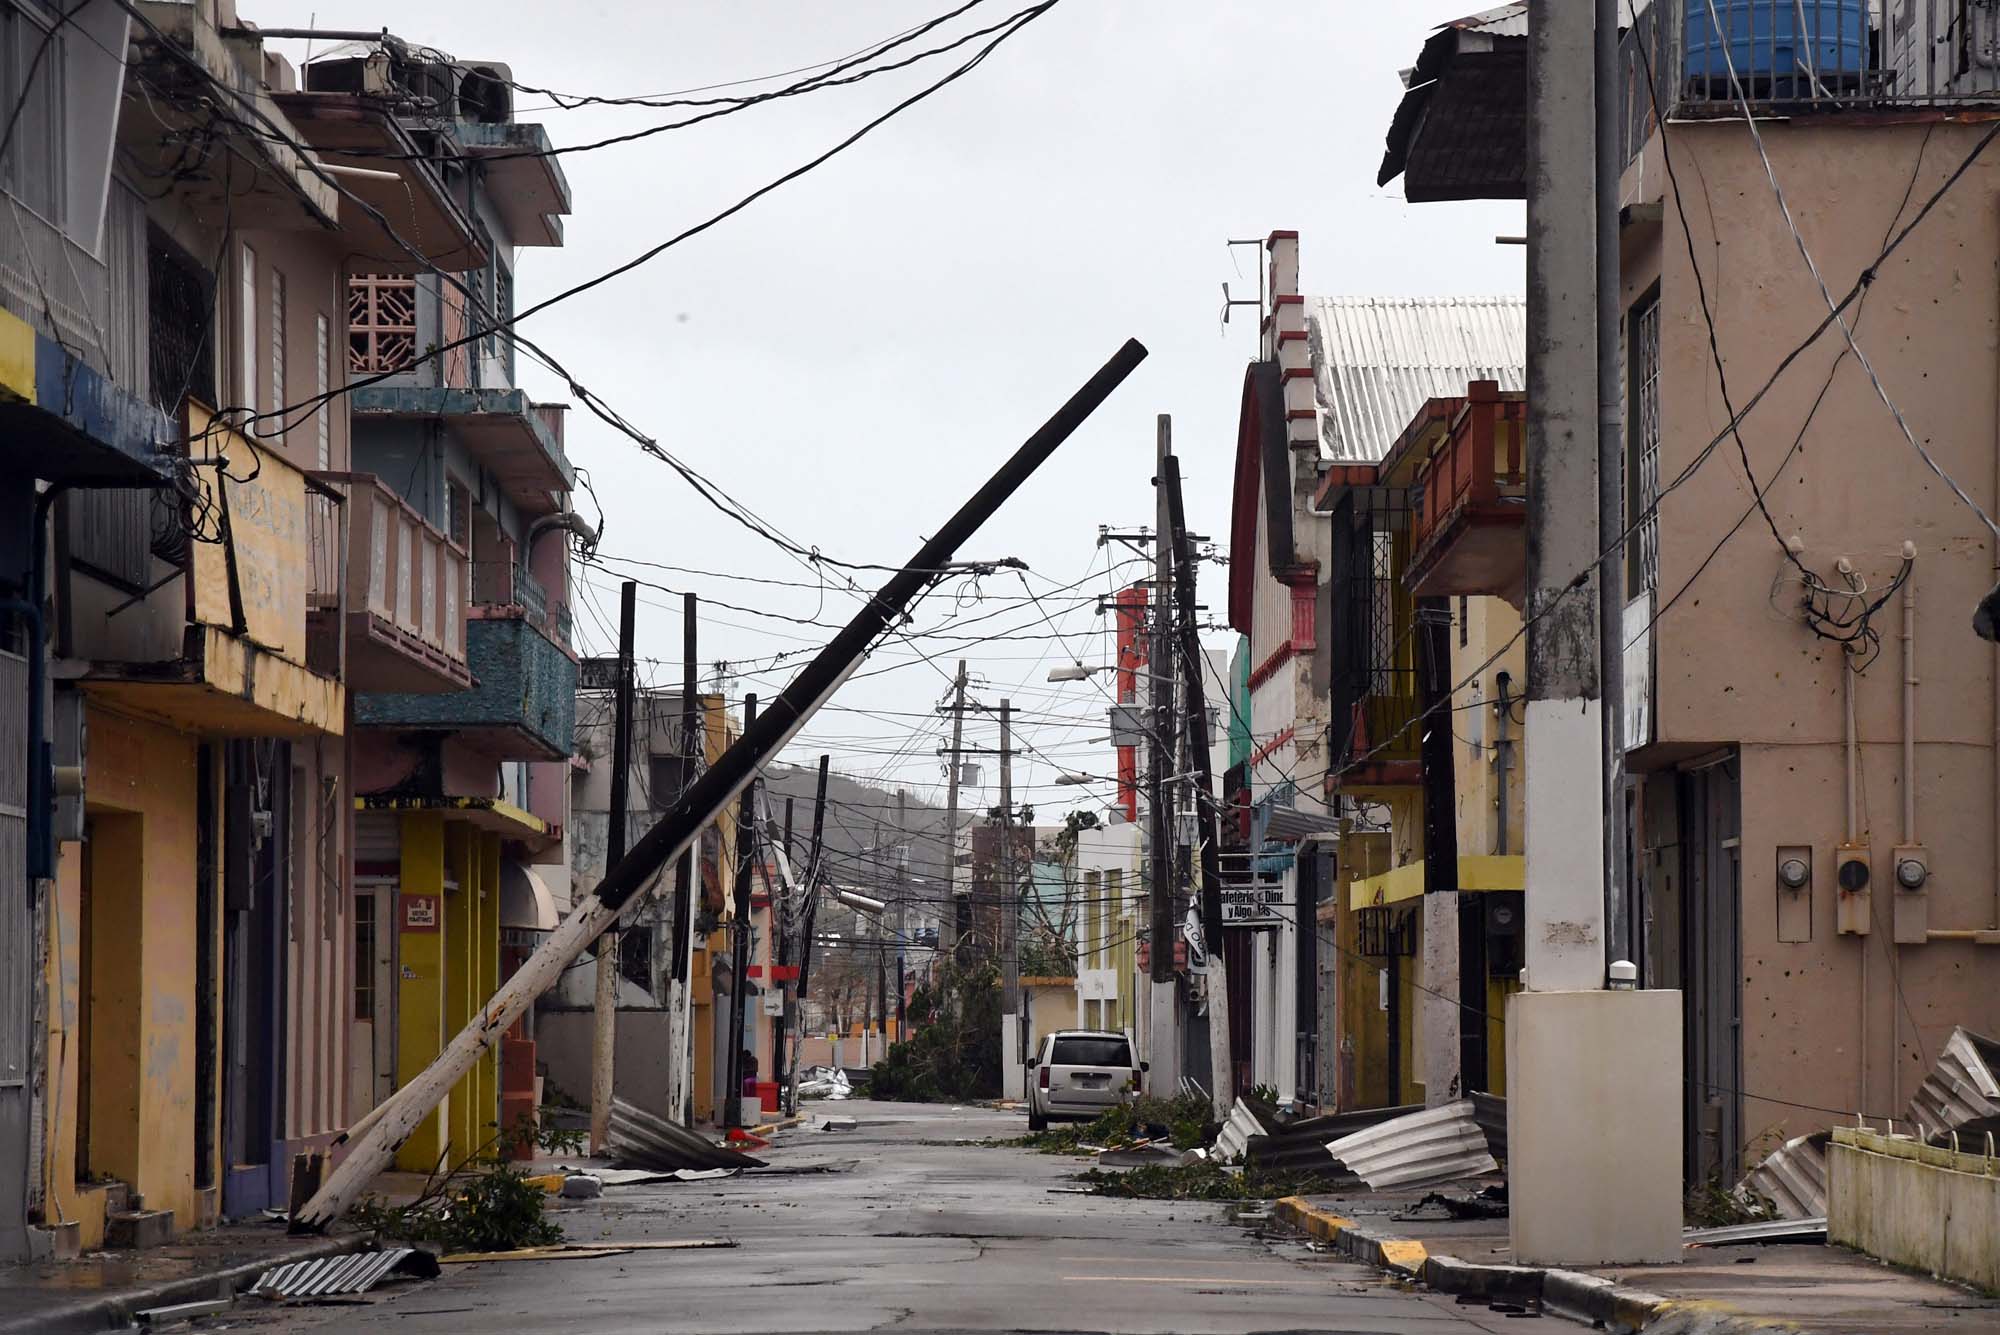 Humacao, Puerto Rico, after Hurricane Maria devastated the island in 2017